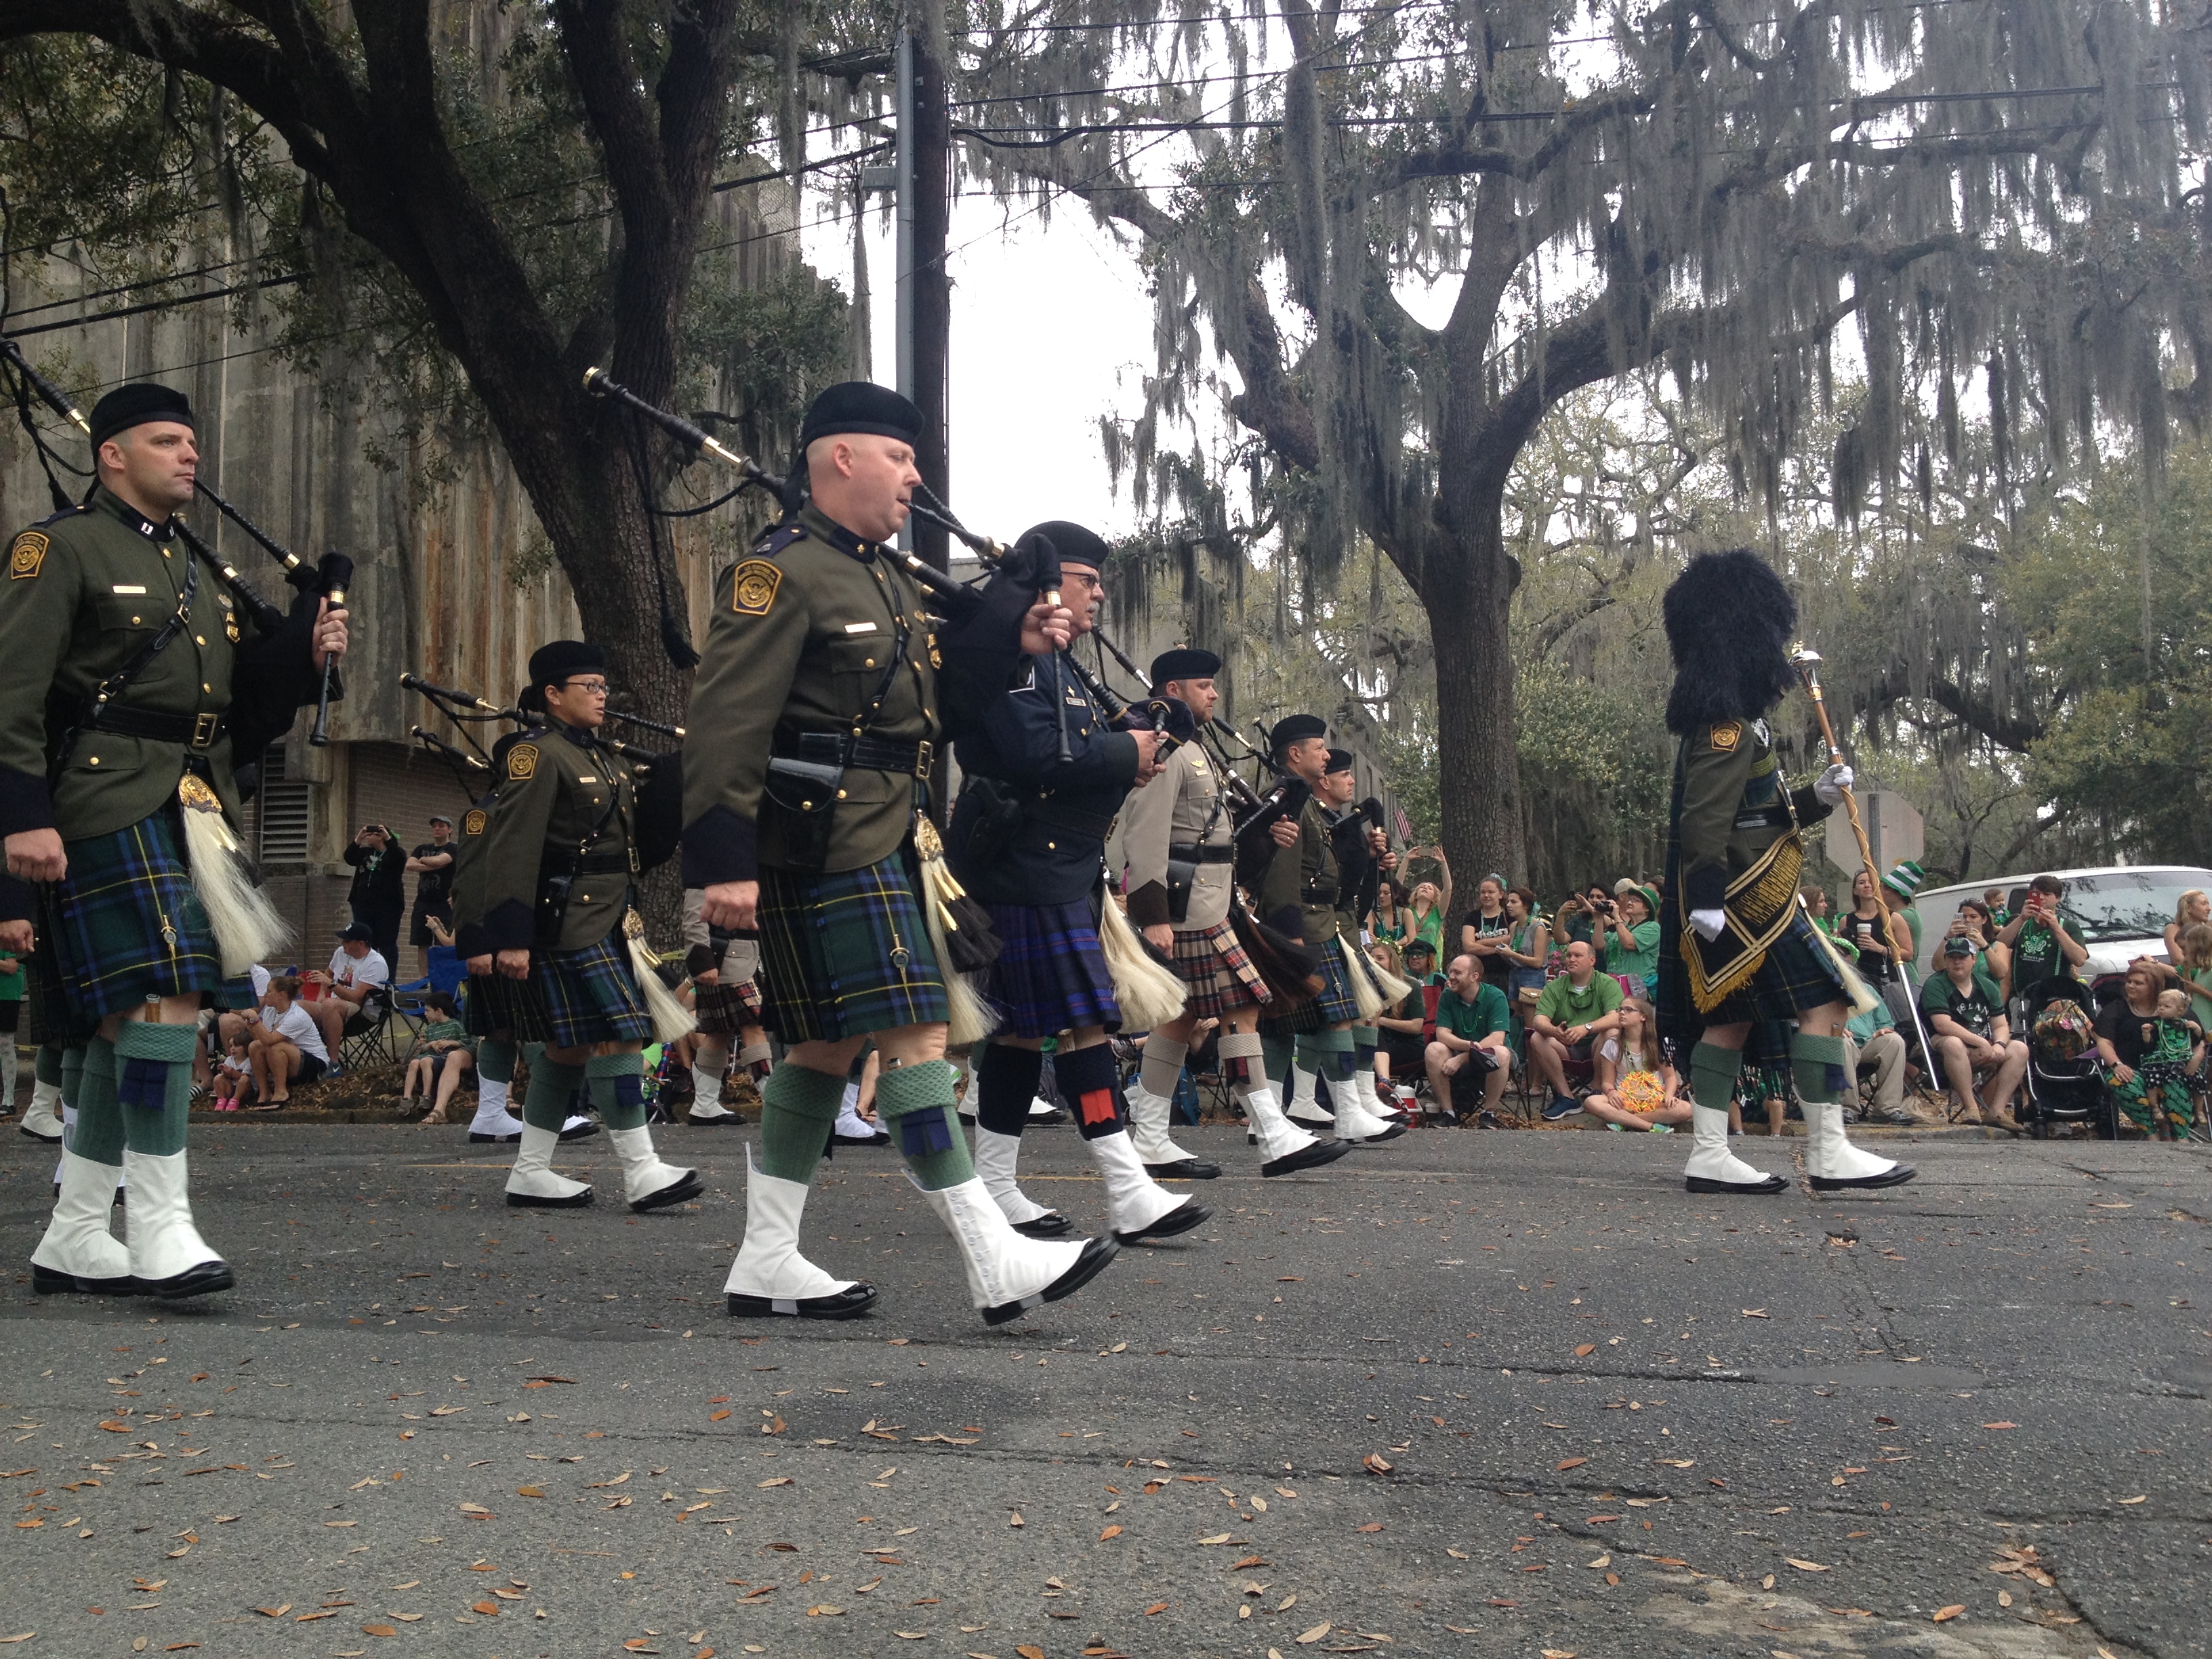 A look back at St. Patrick’s Day 2016 in Savannah